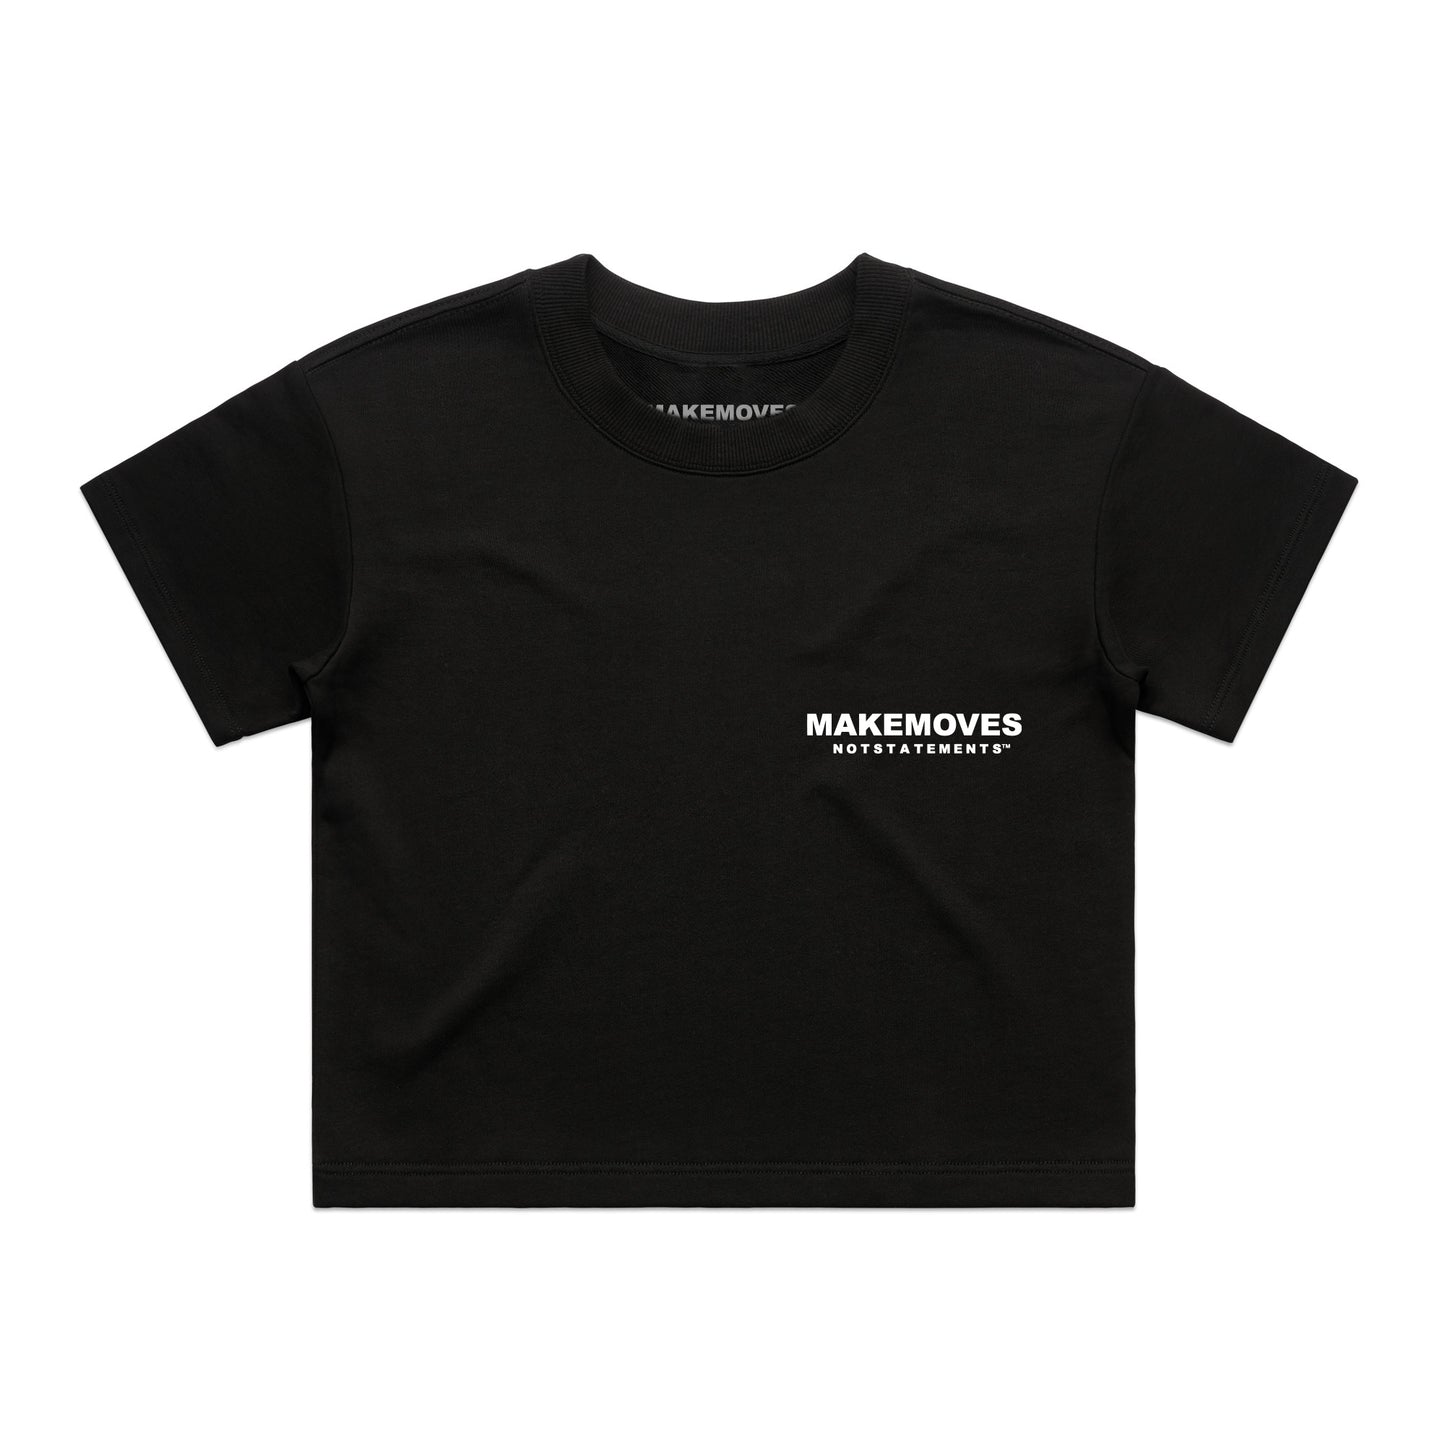 MMNS Woman's Tee in black is made of 100% cotton, french terry. The tee features a small Make Moves Not Statements logo on the front corner and a large logo on the back in white font.